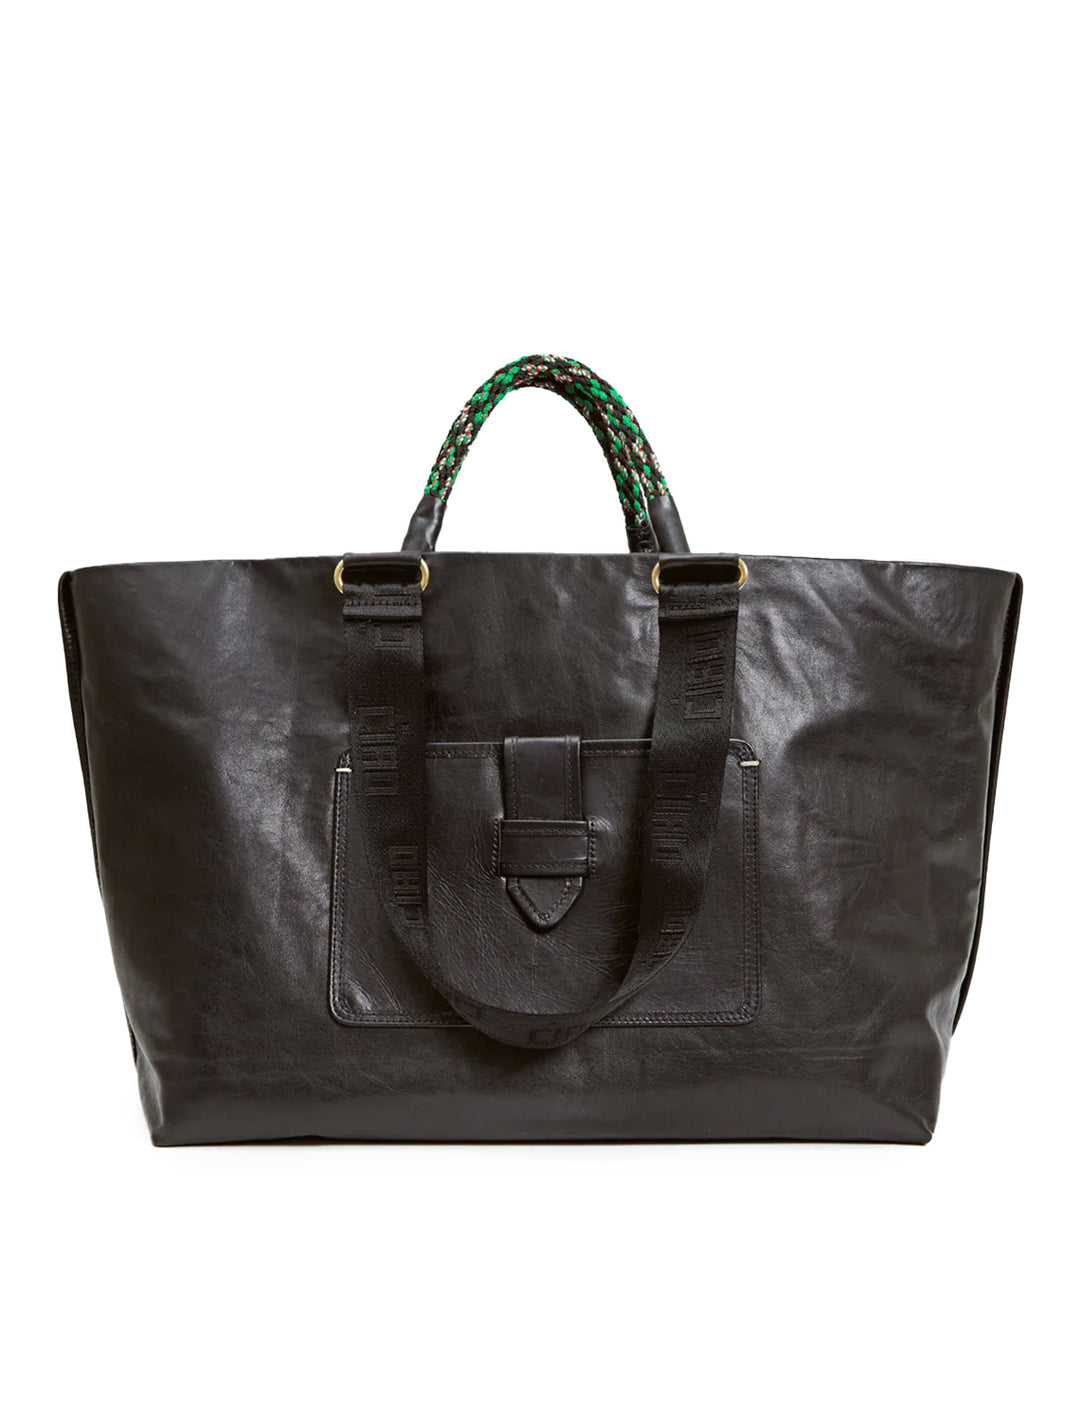 Front view of Clare V.'s grande bateau tote in black new look.